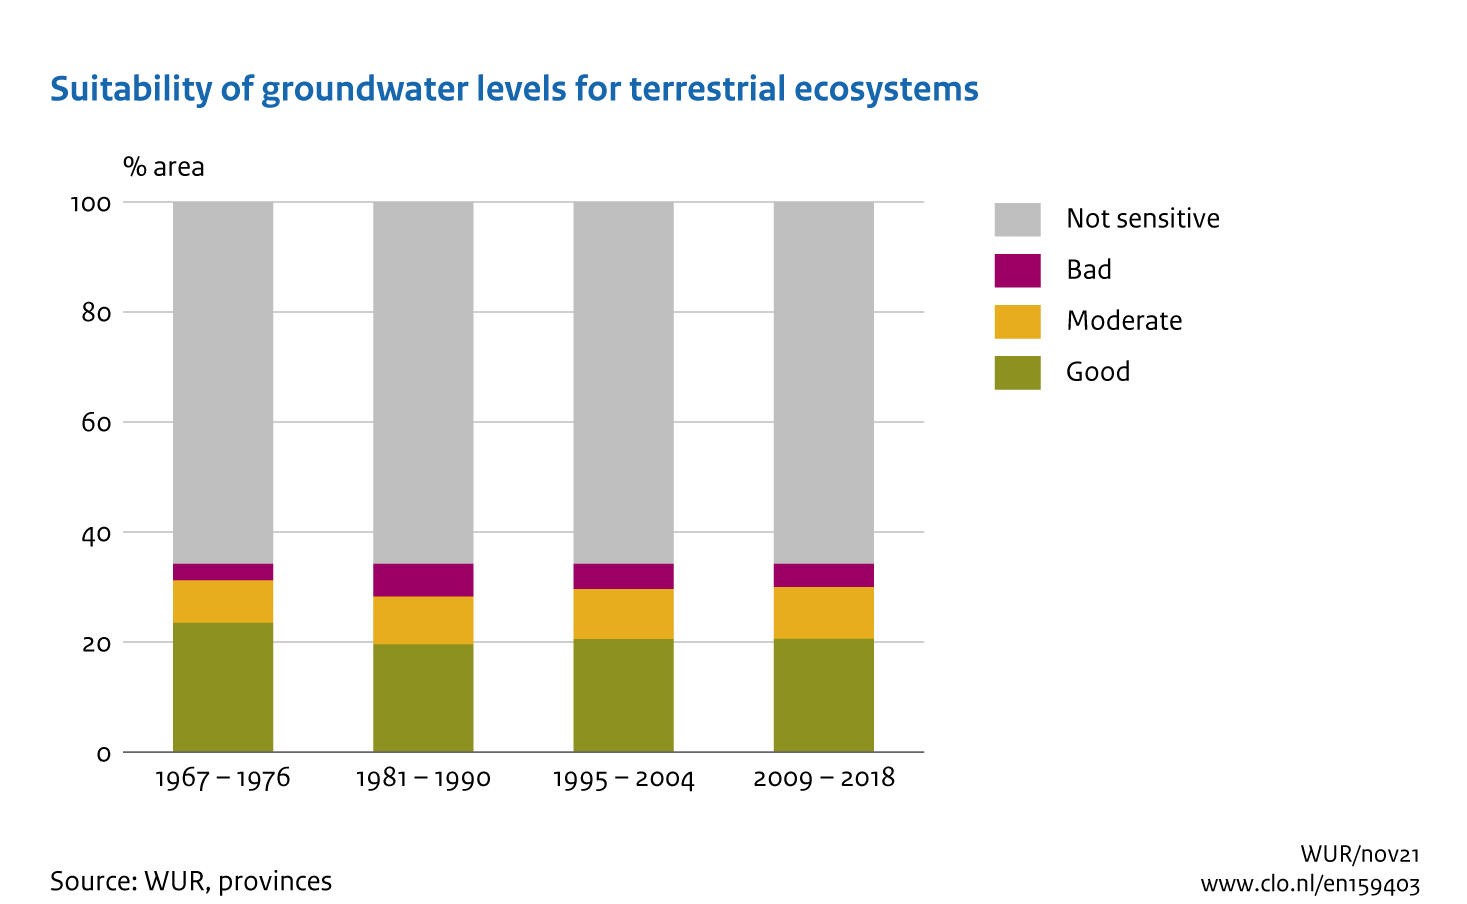 Image Suitability of groundwater levels for terrestrial ecosystems . The image is further explained in the text.